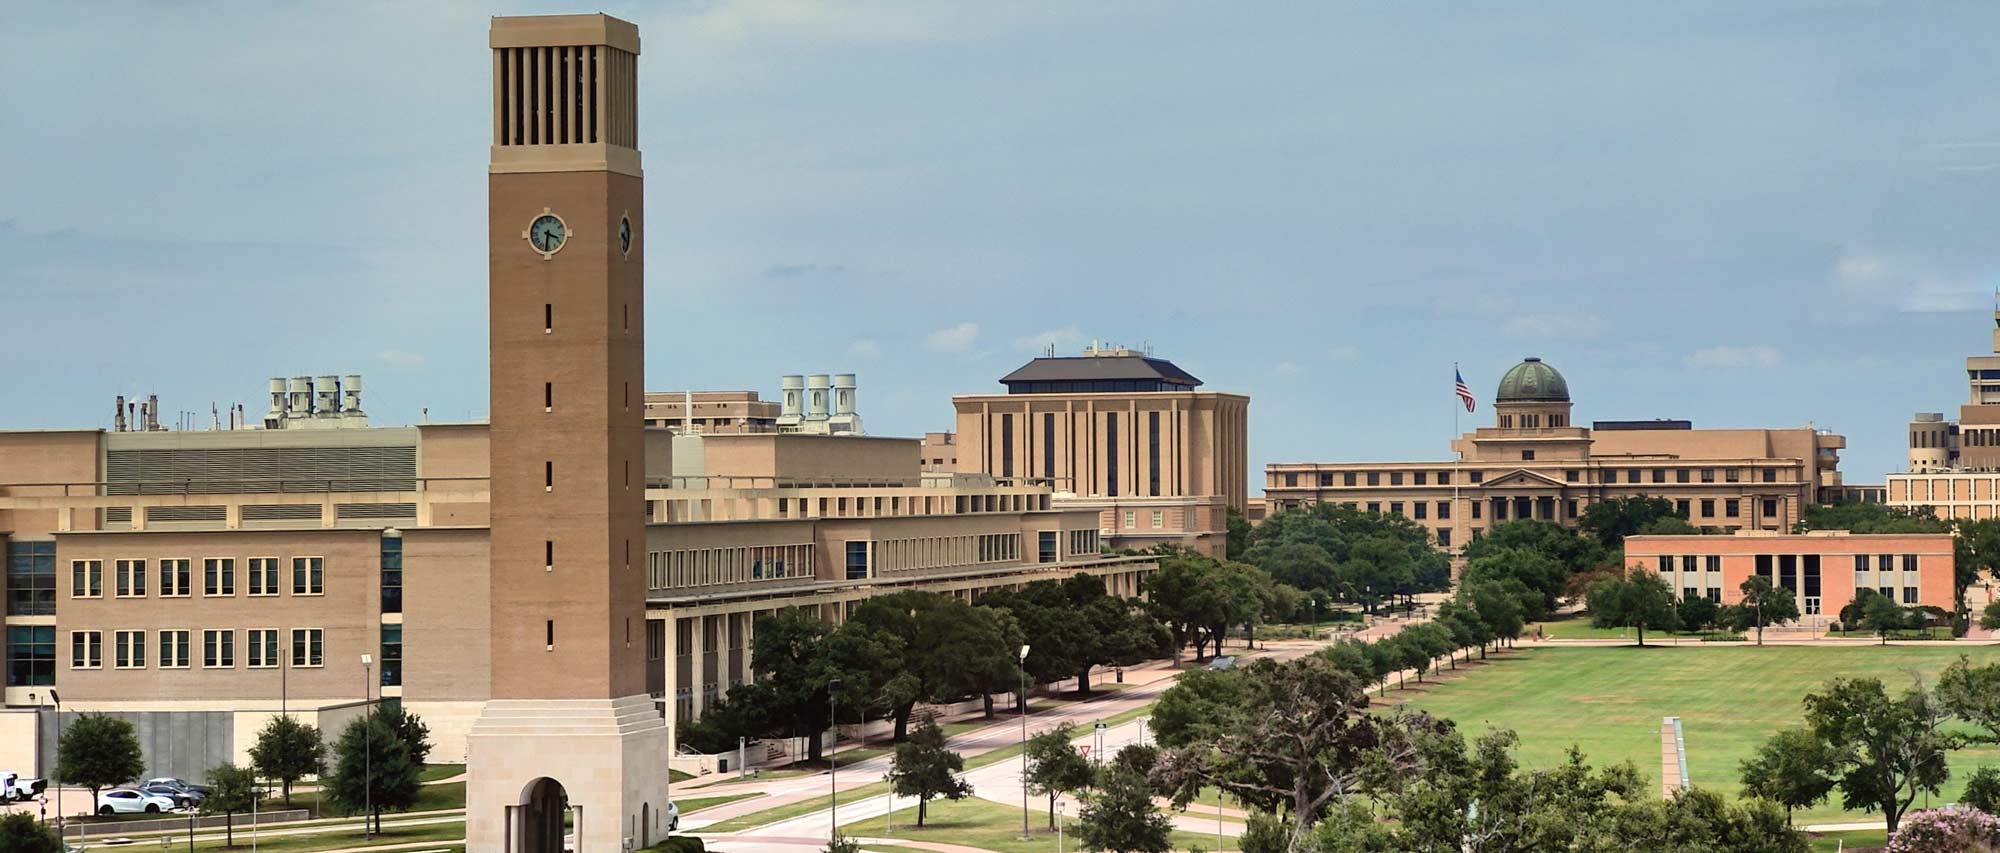 Aerial of Texas A&M campus with the clock tower